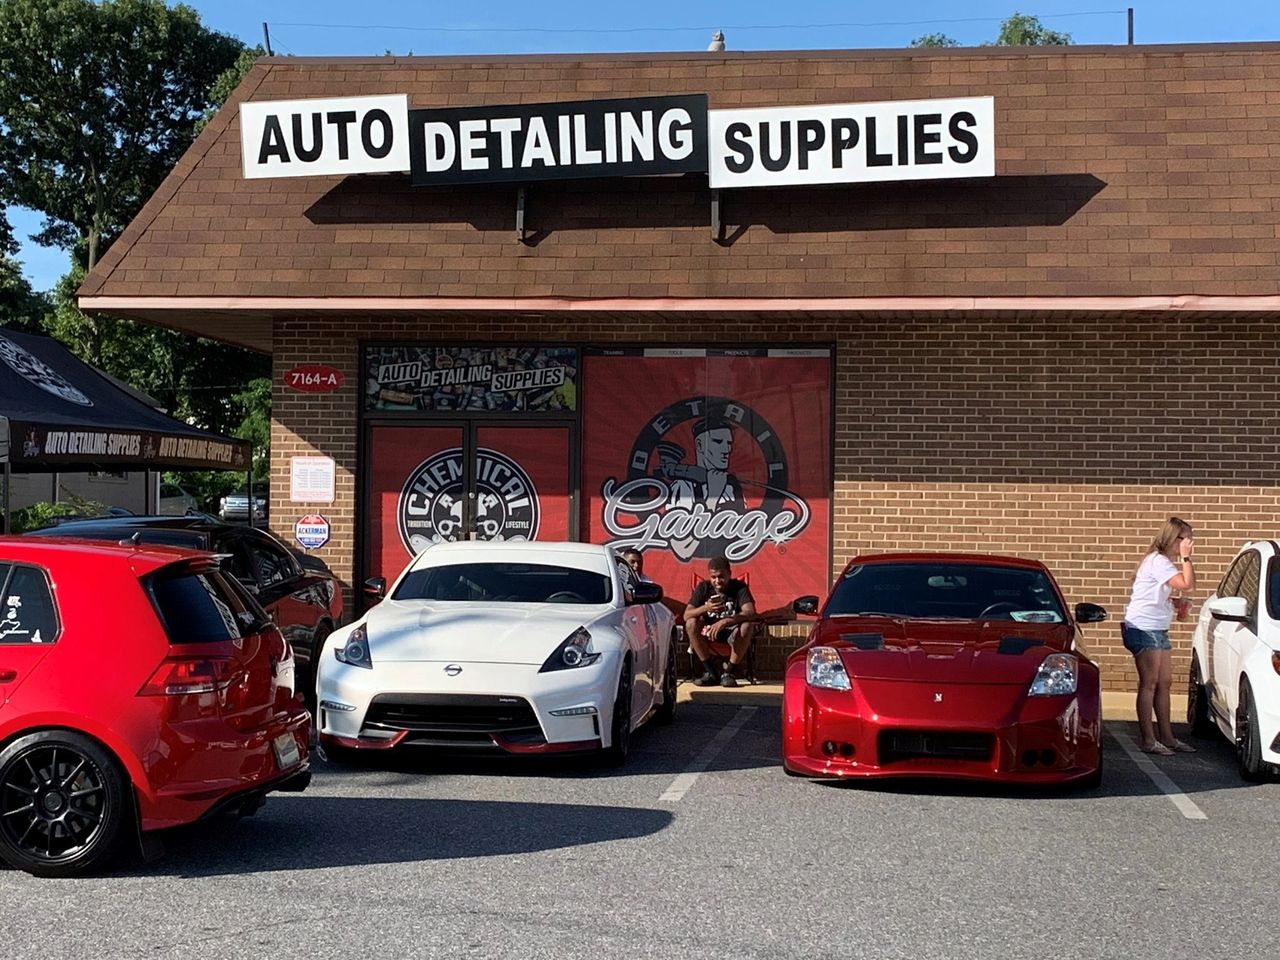 Tuner Xpressions - Your Destination for Car Detailing Supplies